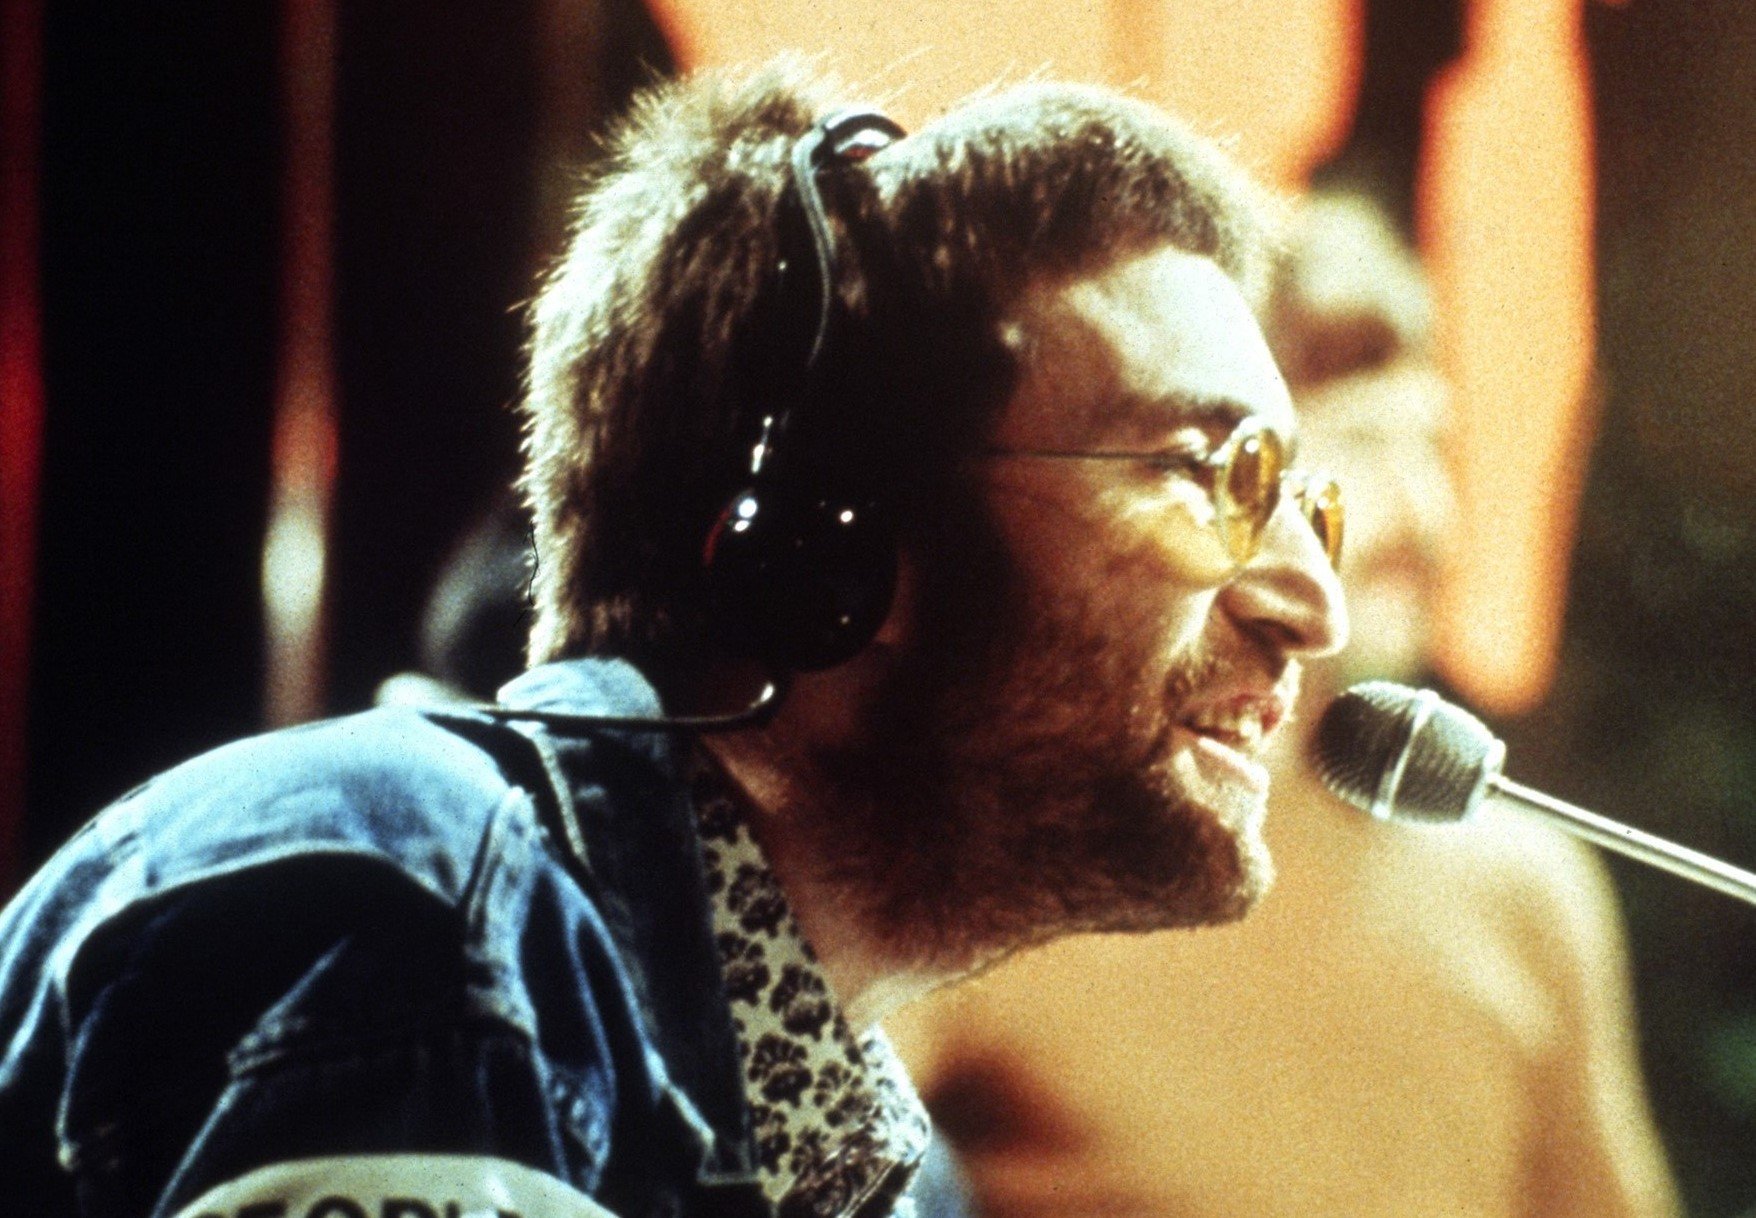 John Lennon with a microphone